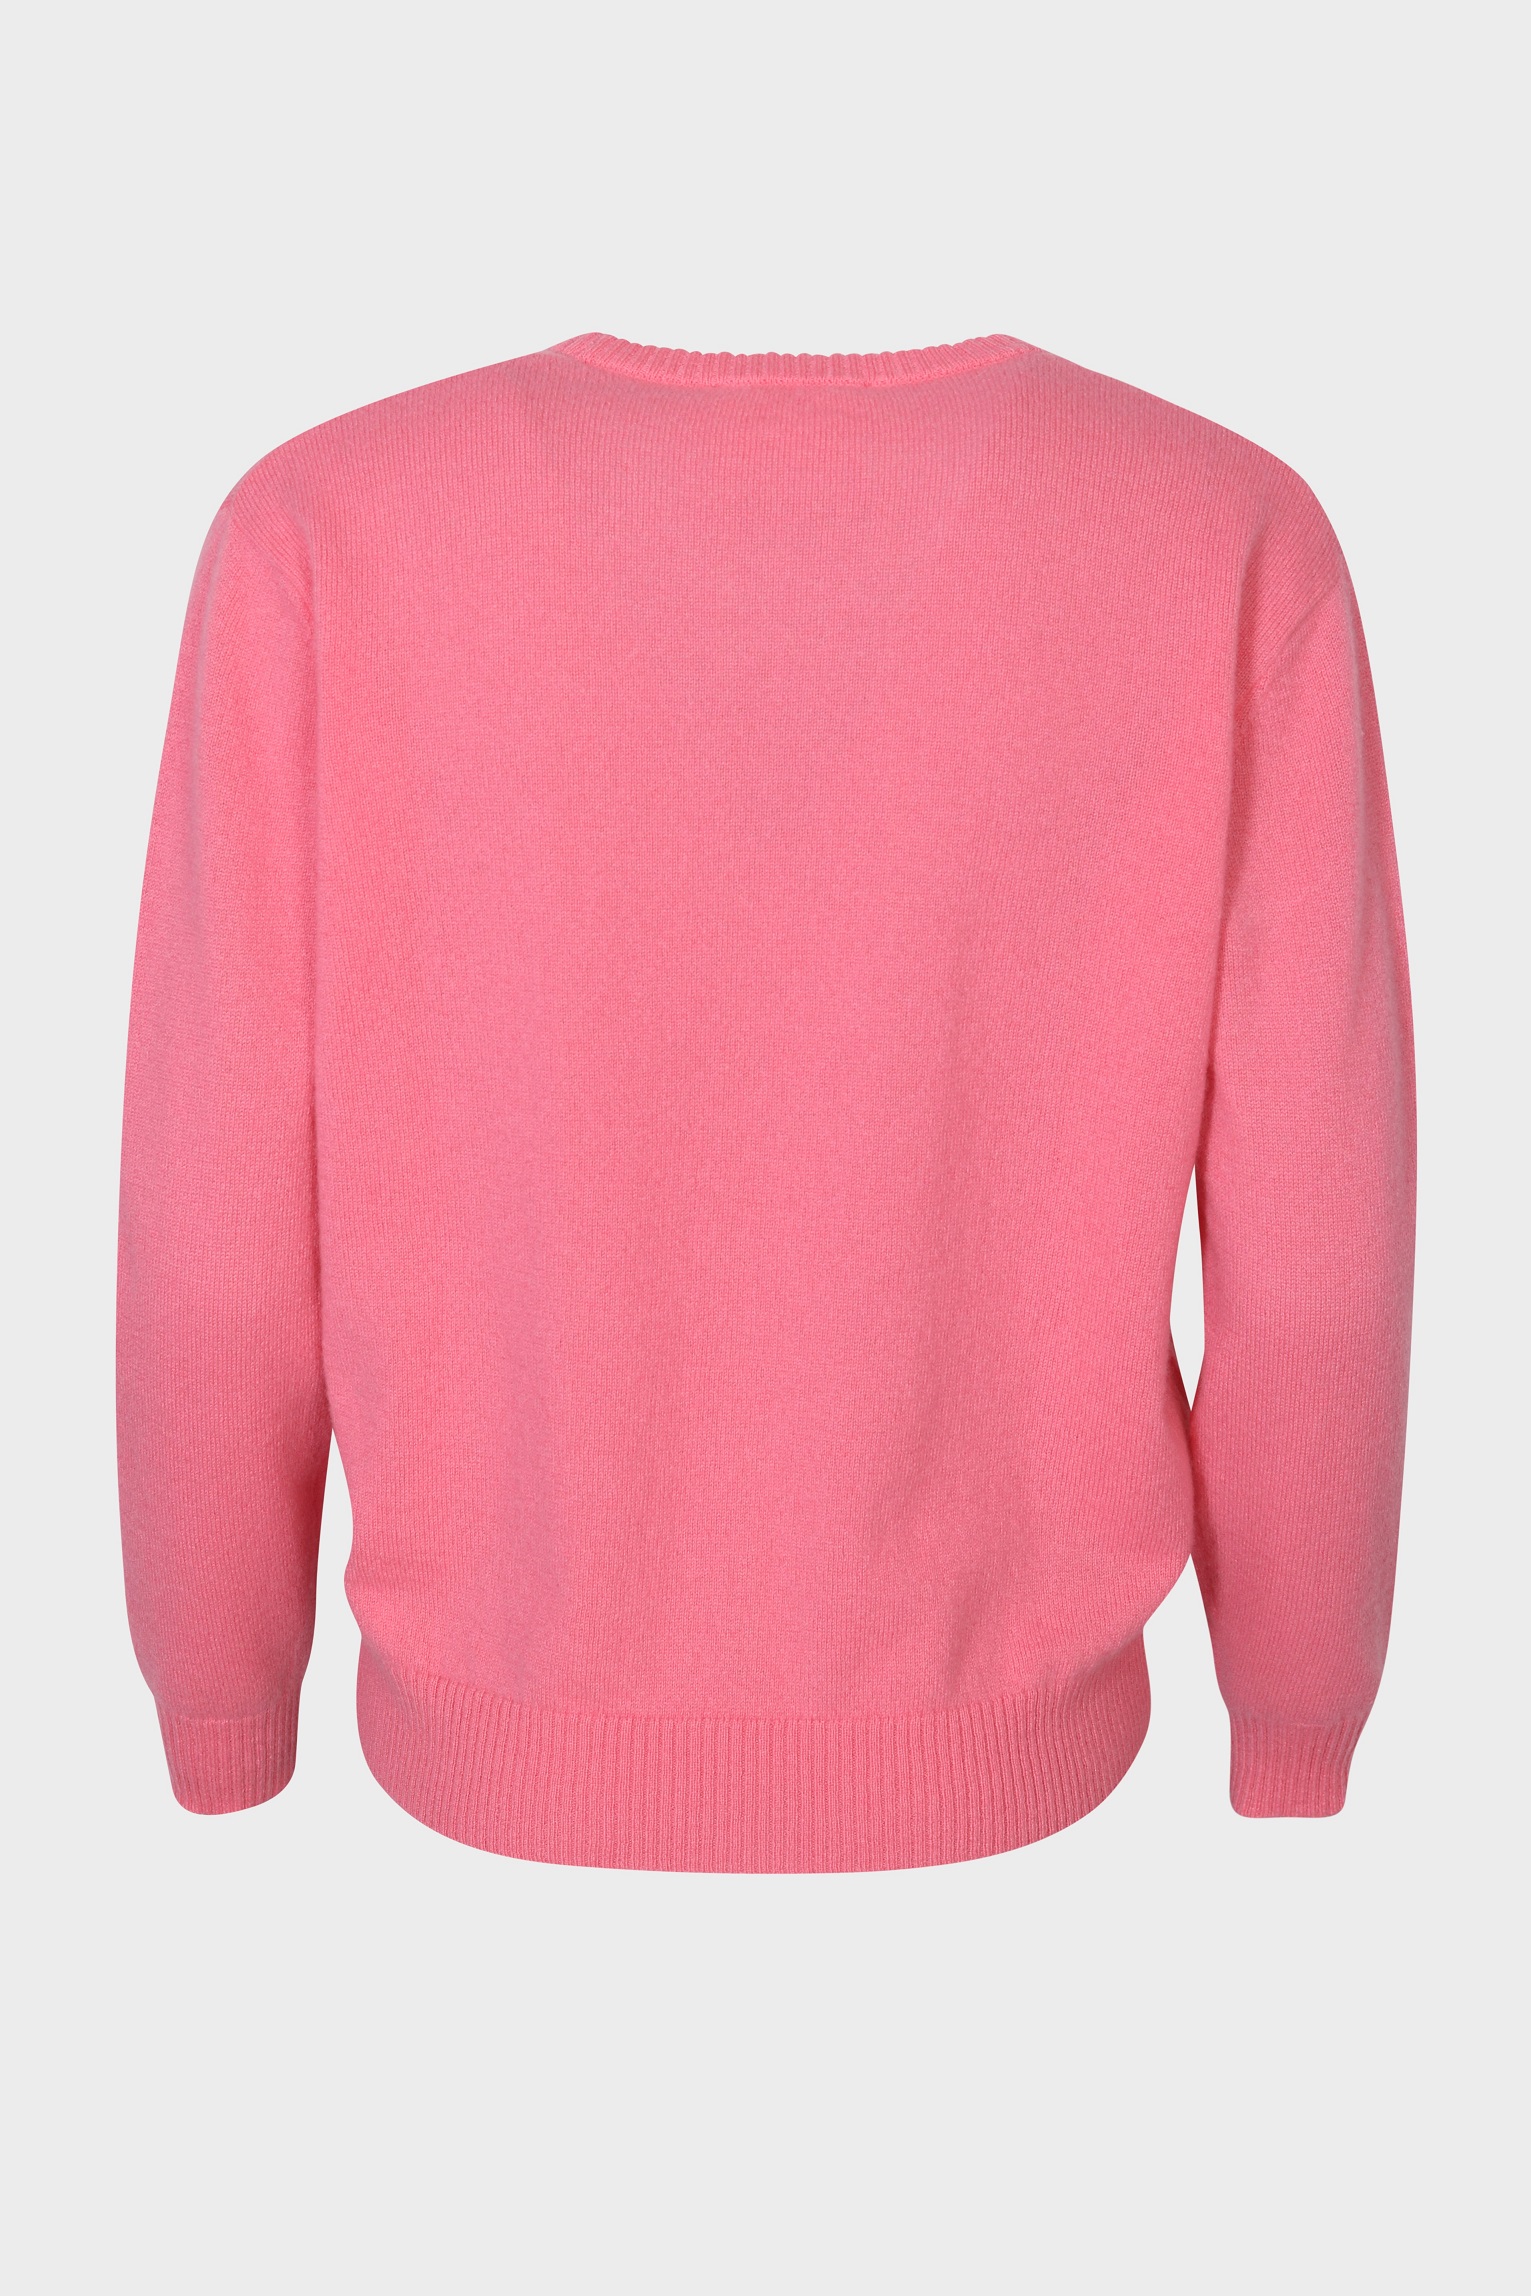 ABSOLUT CASHMERE Sweater Ysee Flamingo S